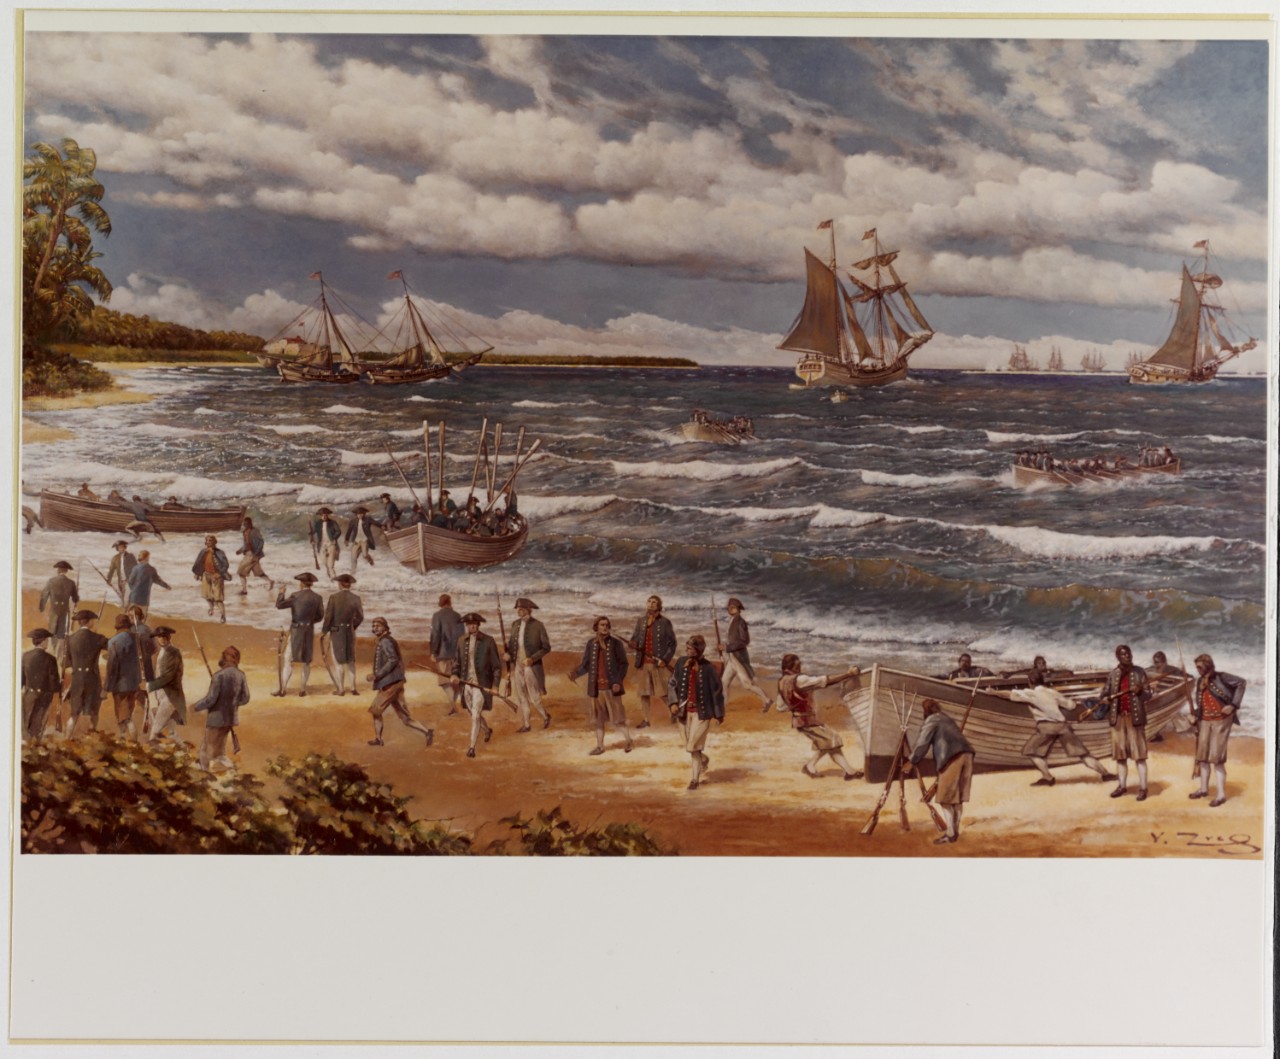 Image of first overseas Expedition of the Continental Navy at the shore